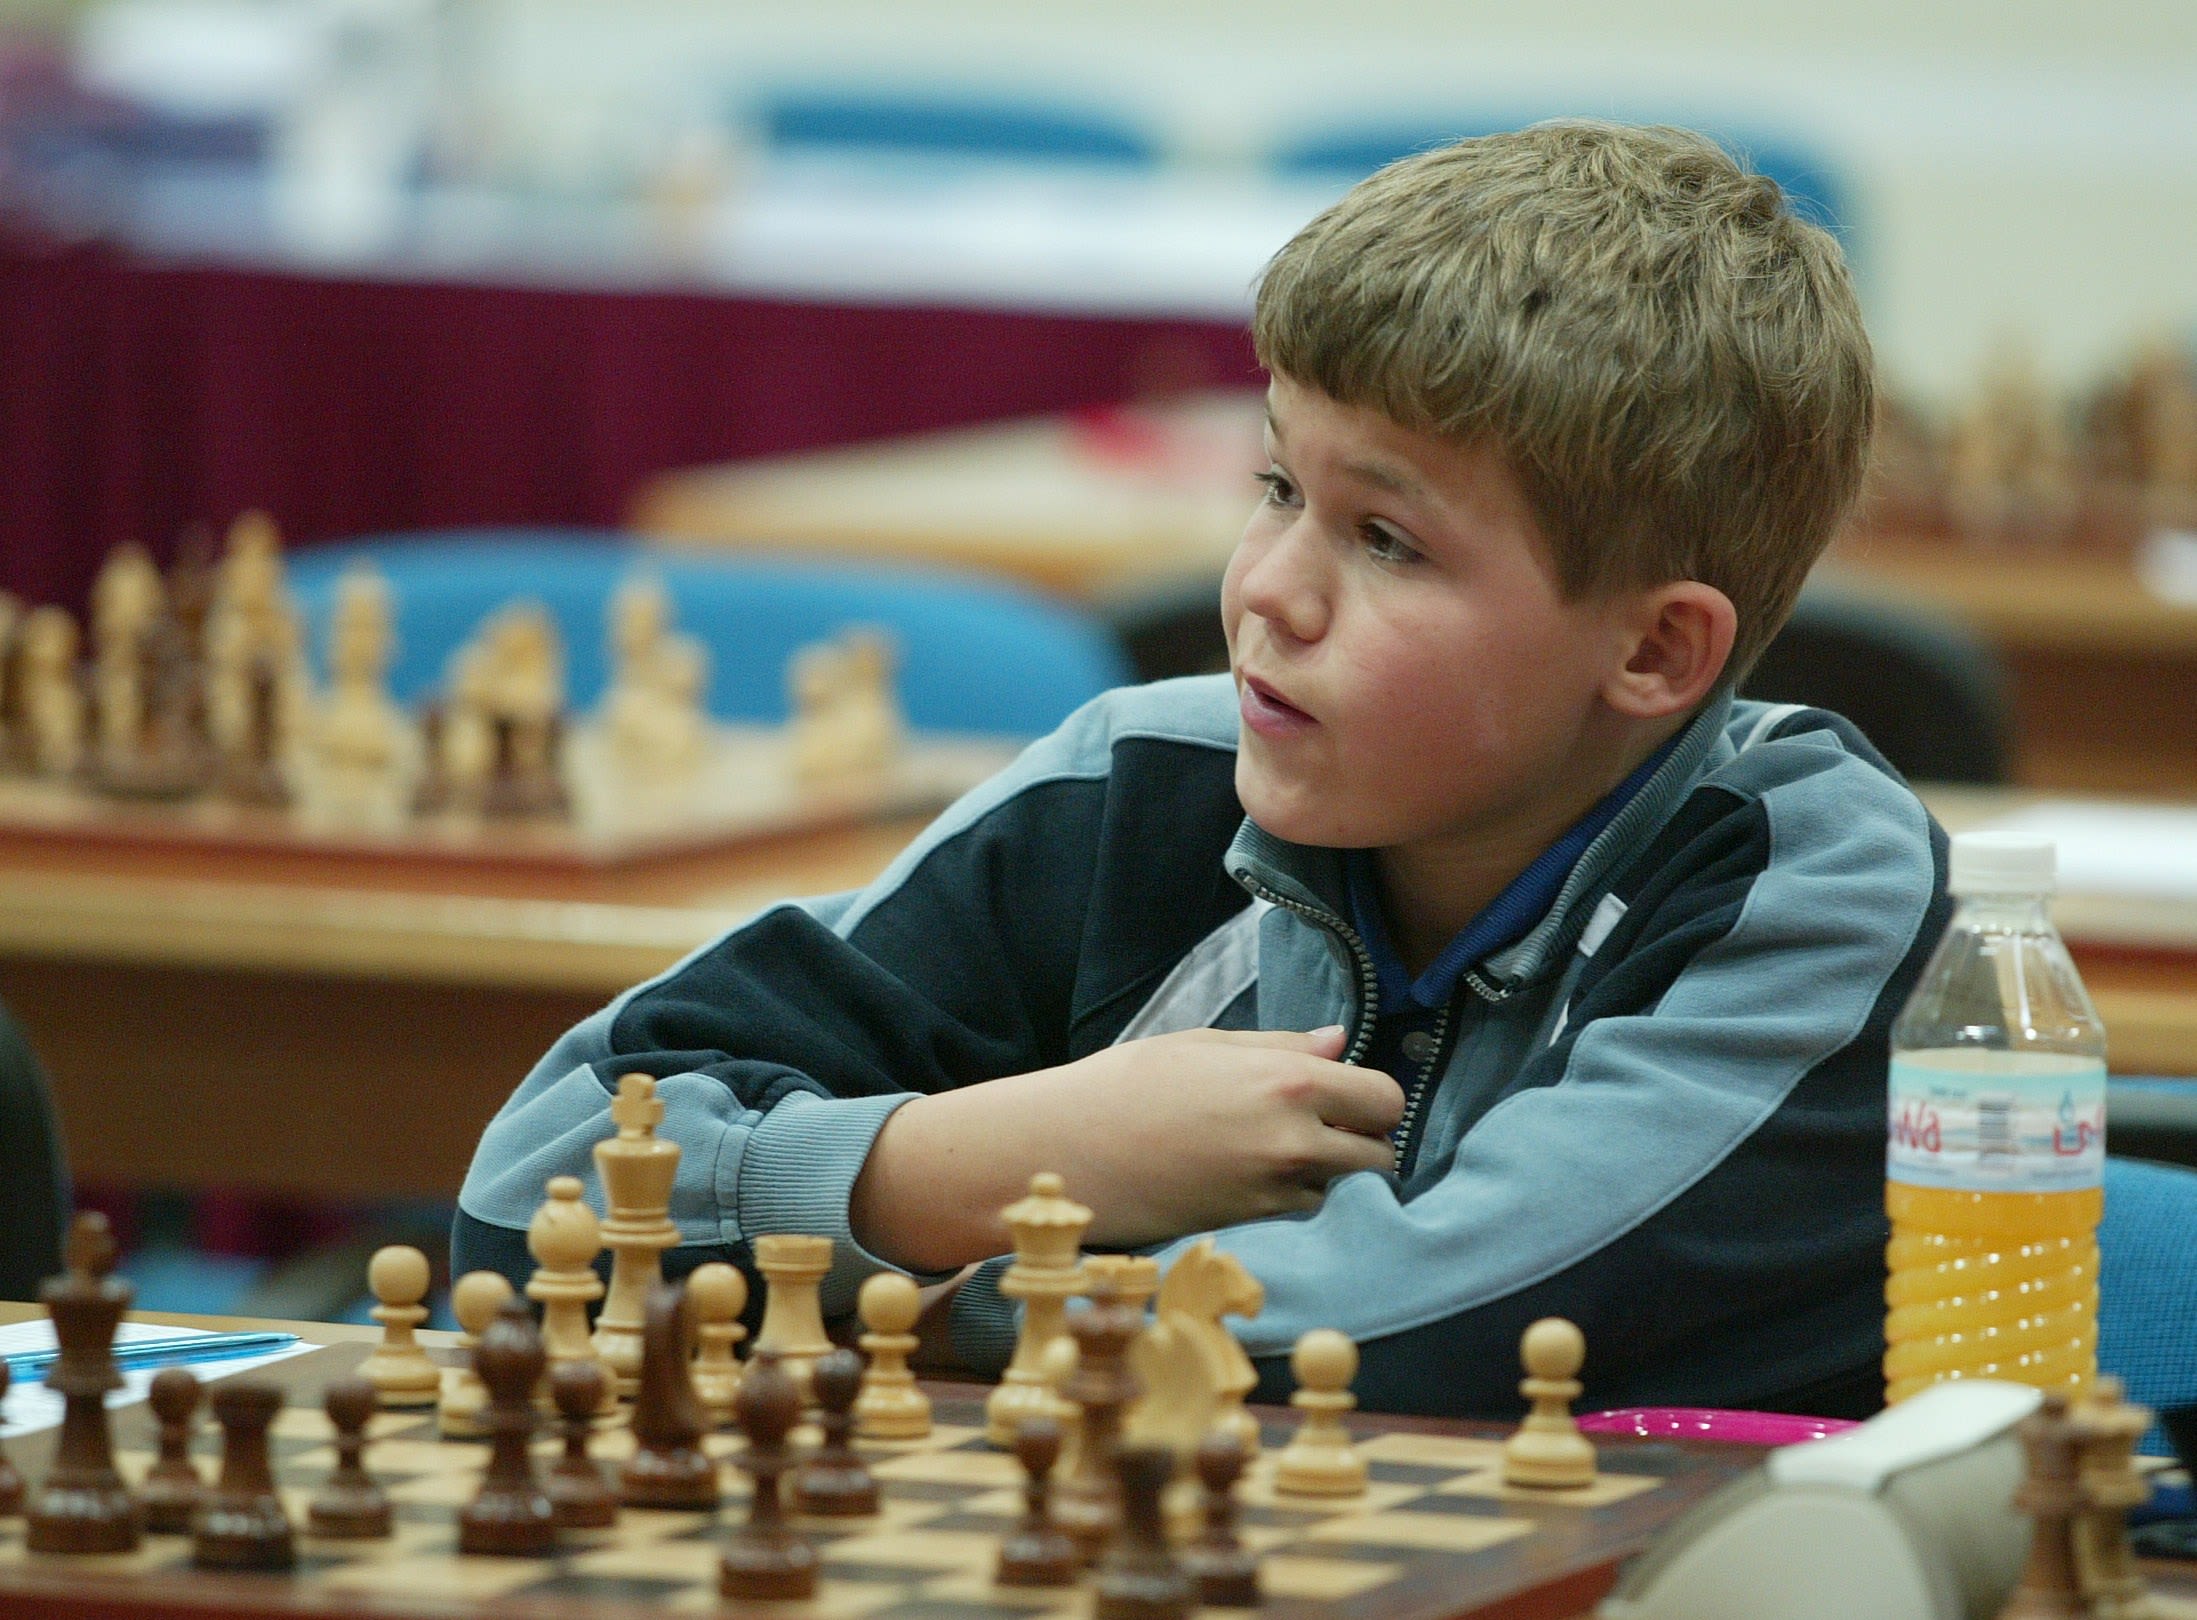 Best ever chess game by a 13 year old?